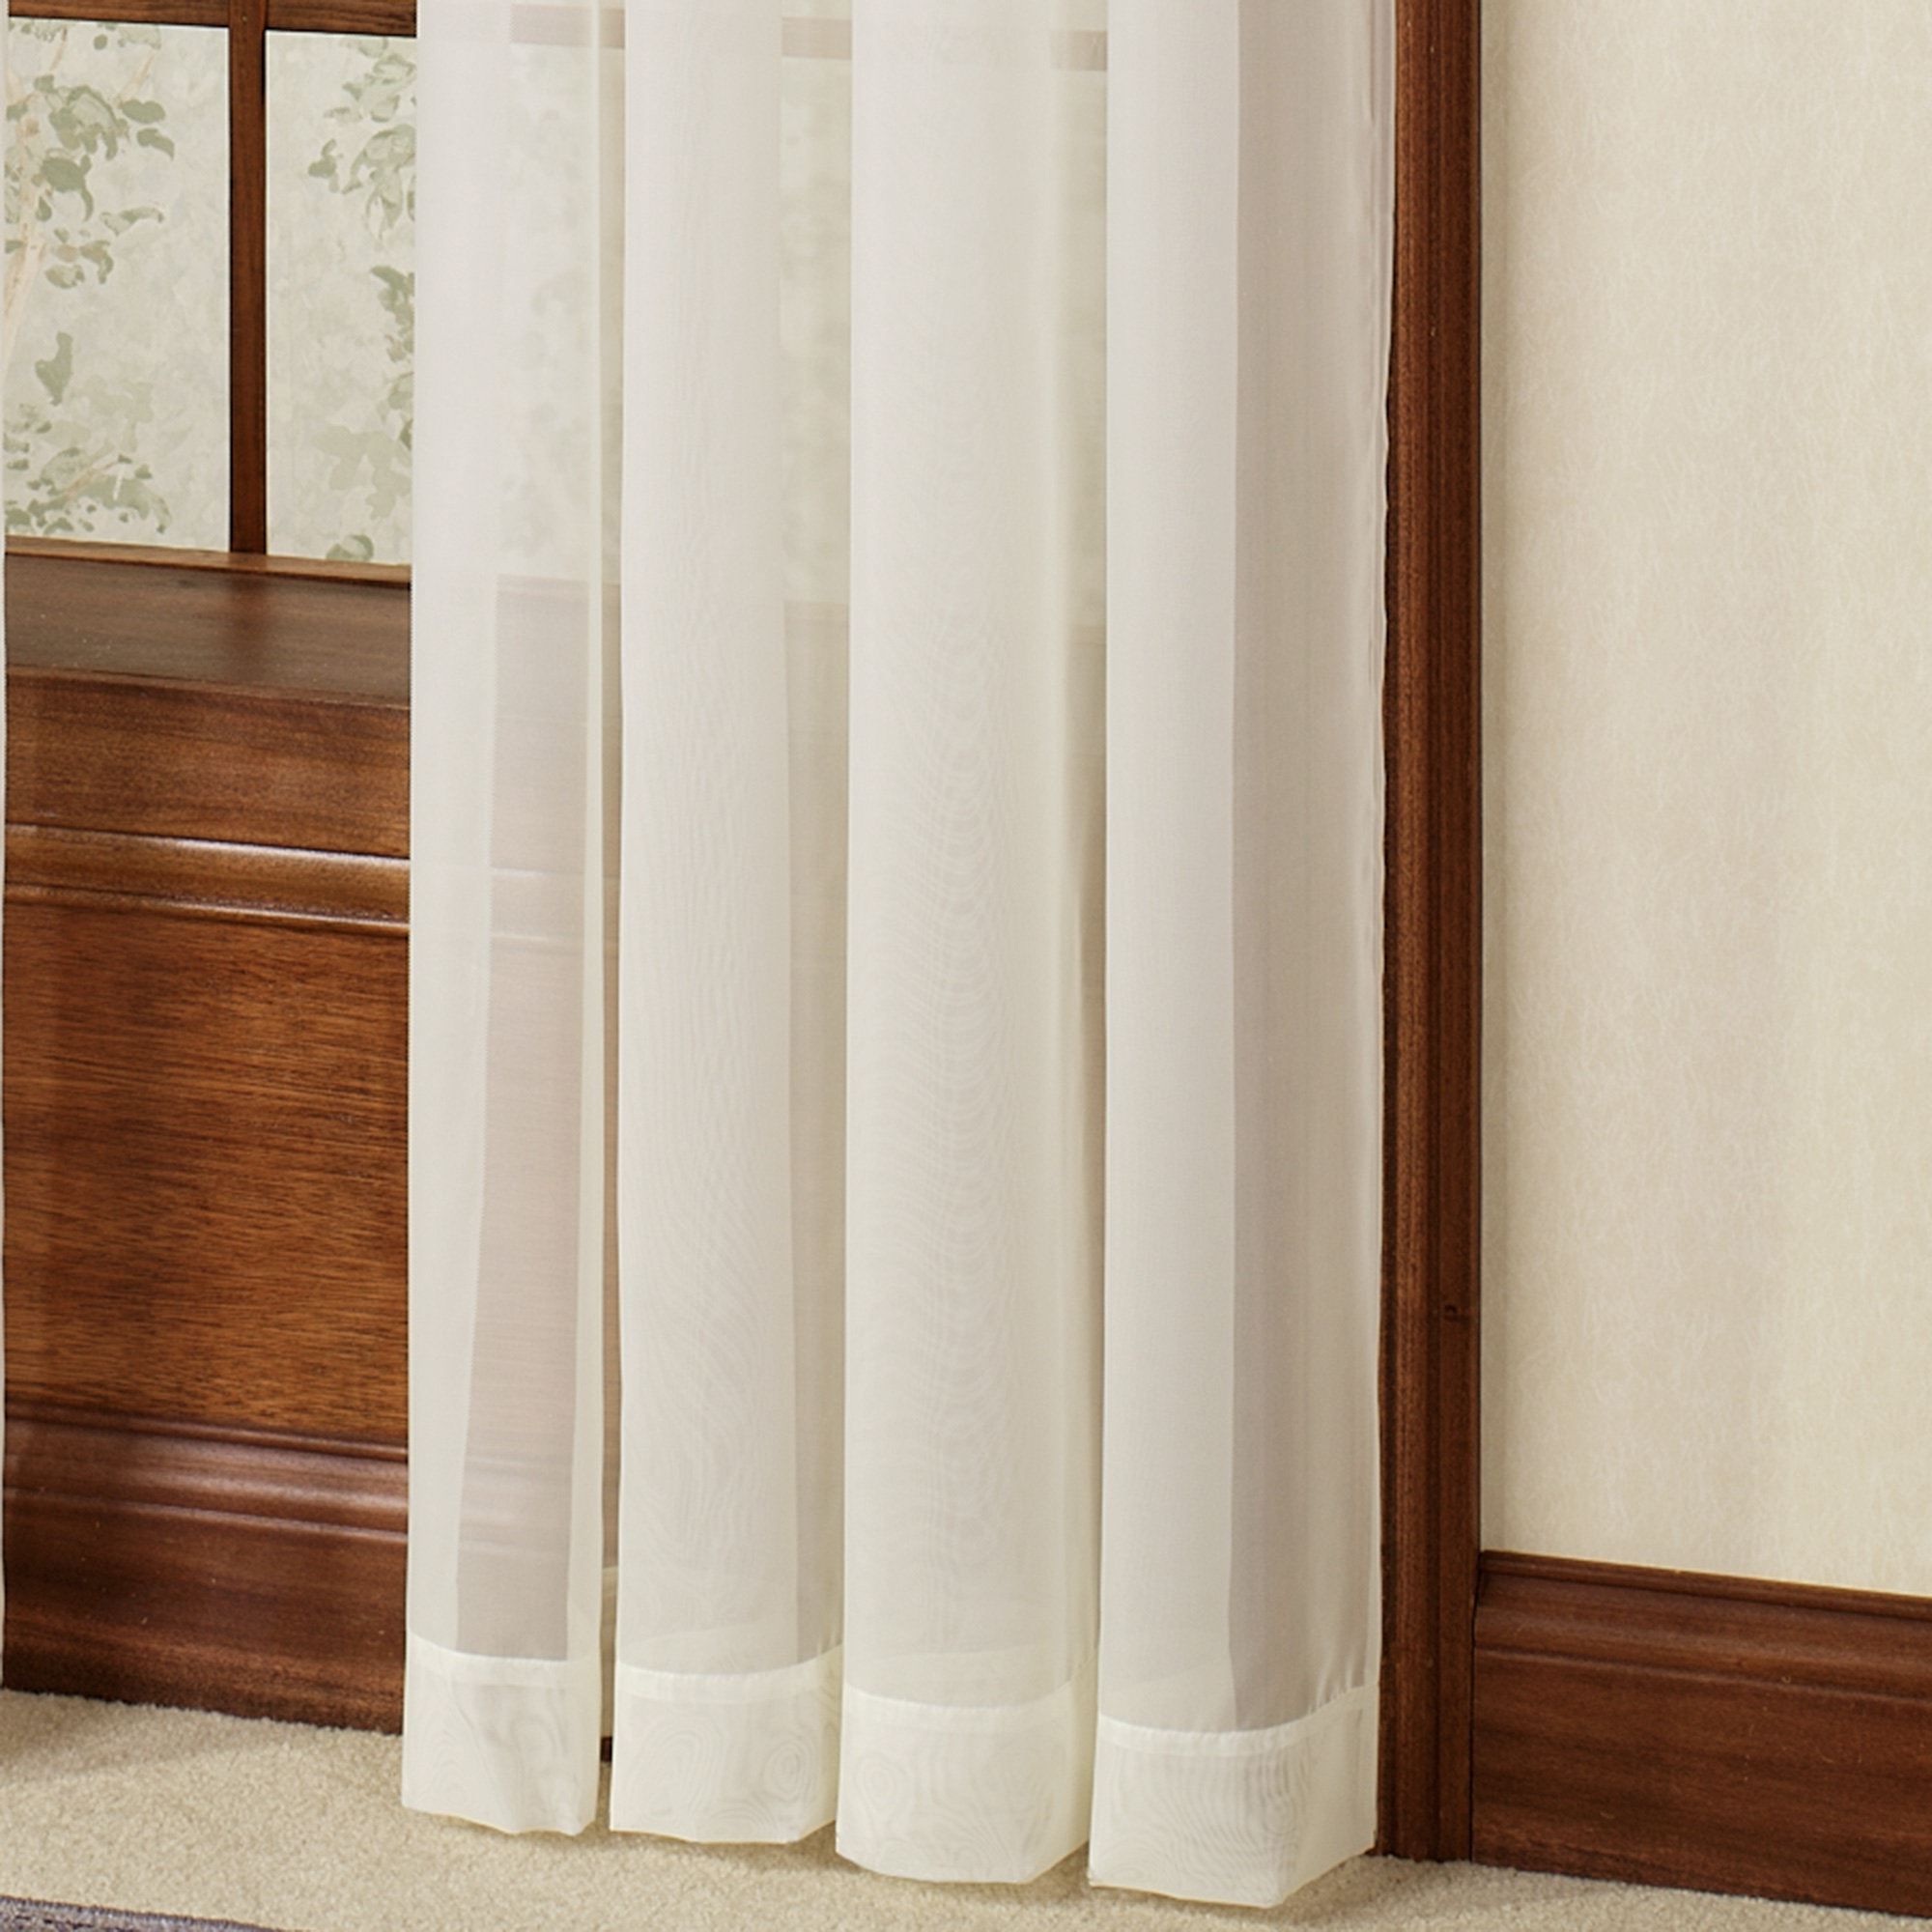 Arm And Hammer Curtain Fresh Odor Neutralizing Curtain Panels Pertaining To Popular Arm And Hammer Curtains Fresh Odor Neutralizing Single Curtain Panels (View 4 of 20)